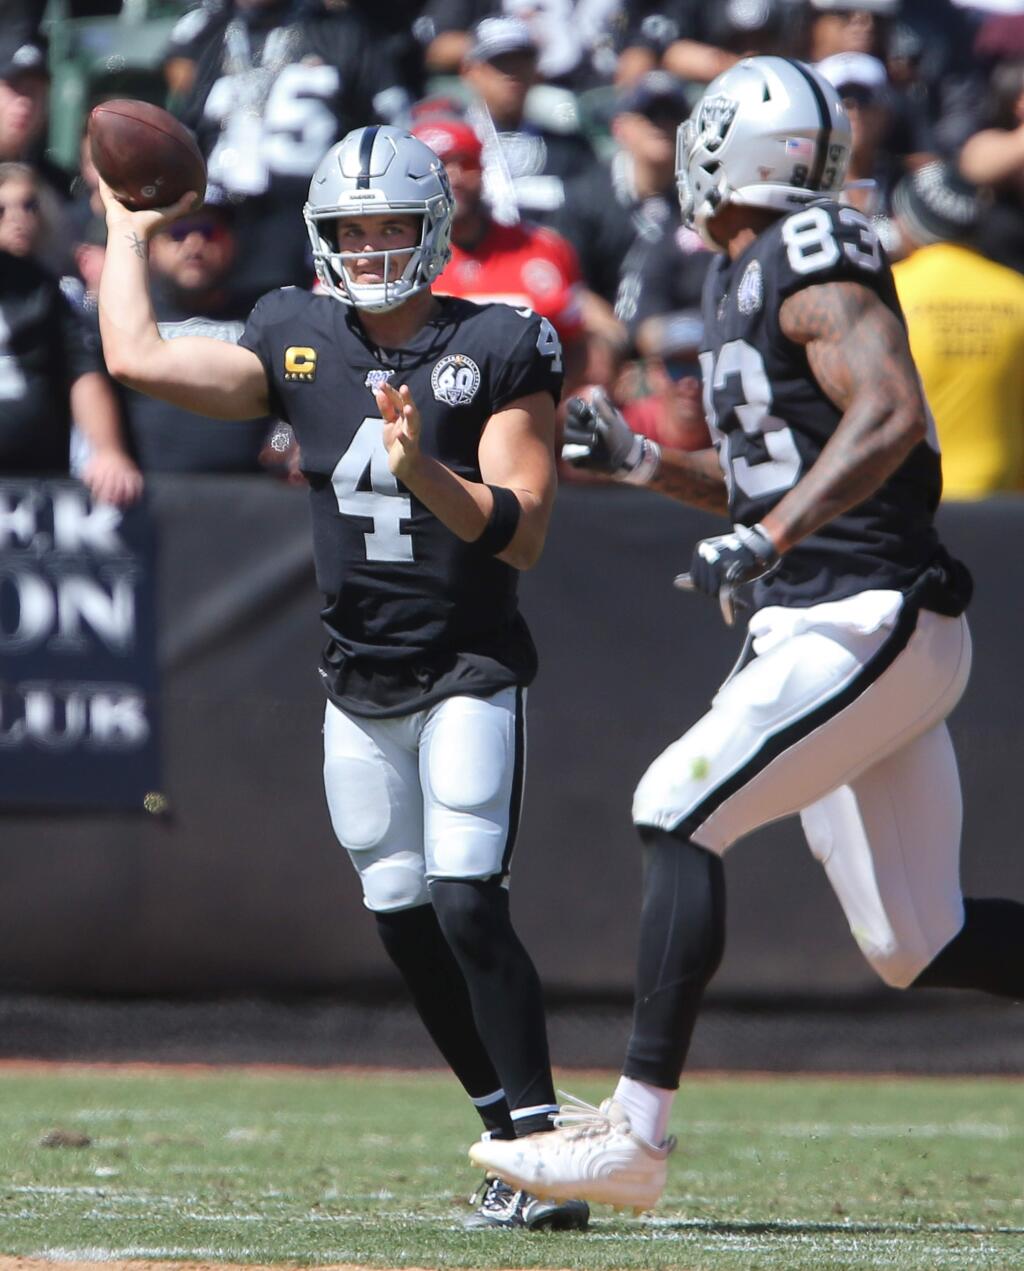 Oakland Raiders quarterback Derek Carr delivers a pass to Oakland Raiders tight end Darren Waller against the Kansas City Chiefs in Oakland on Sunday, September 15, 2019. (Christopher Chung/ The Press Democrat)